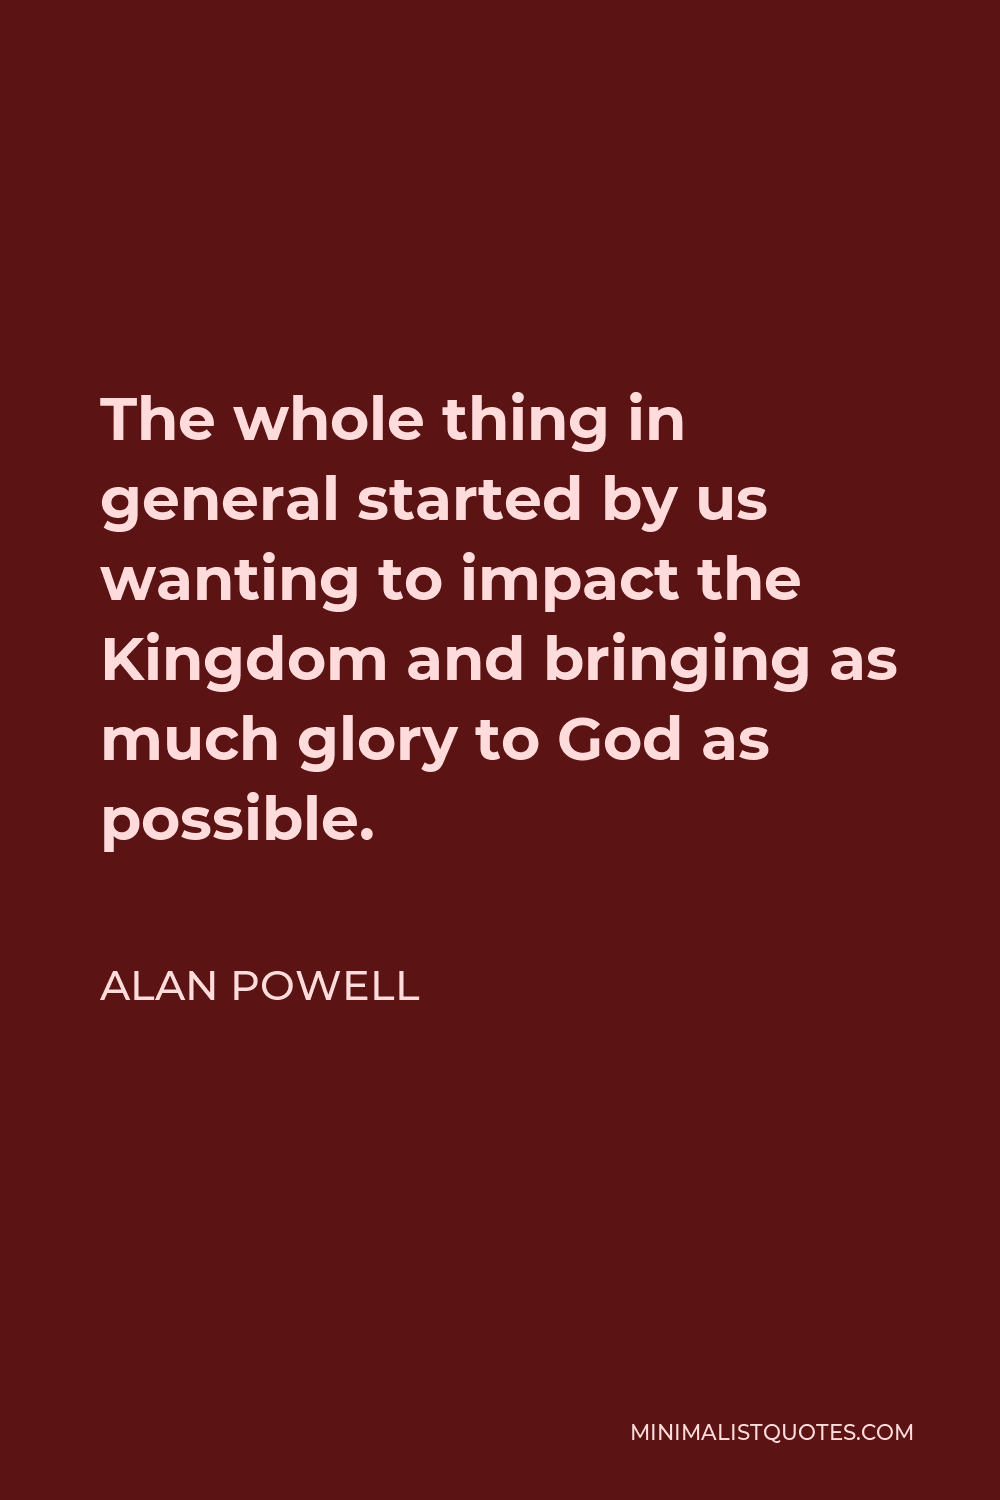 Alan Powell Quote - The whole thing in general started by us wanting to impact the Kingdom and bringing as much glory to God as possible.